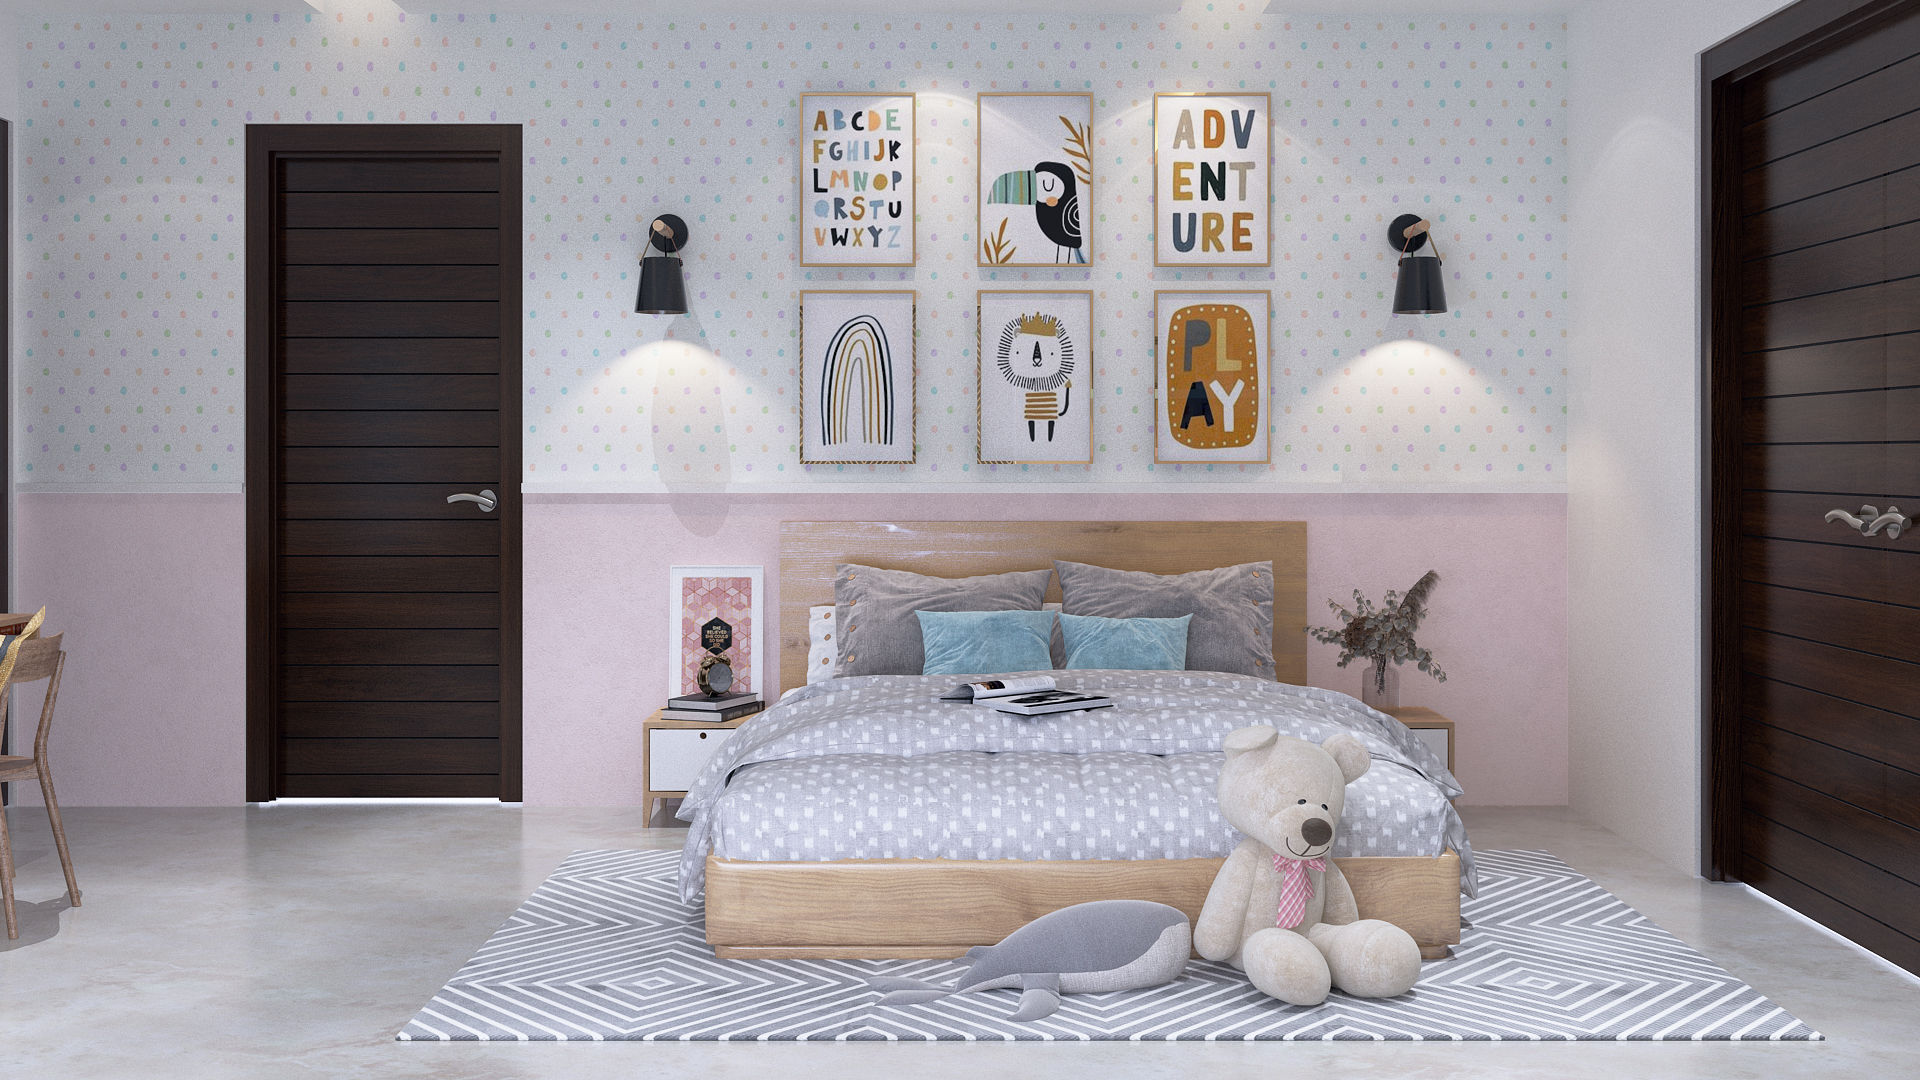 Daughter's room designed in pink and white theme homify Eclectic style nursery/kids room kids room interior ,daughter room designs, interior designer in delhi, interior designer in Gurgaon, Interior designer in Noida